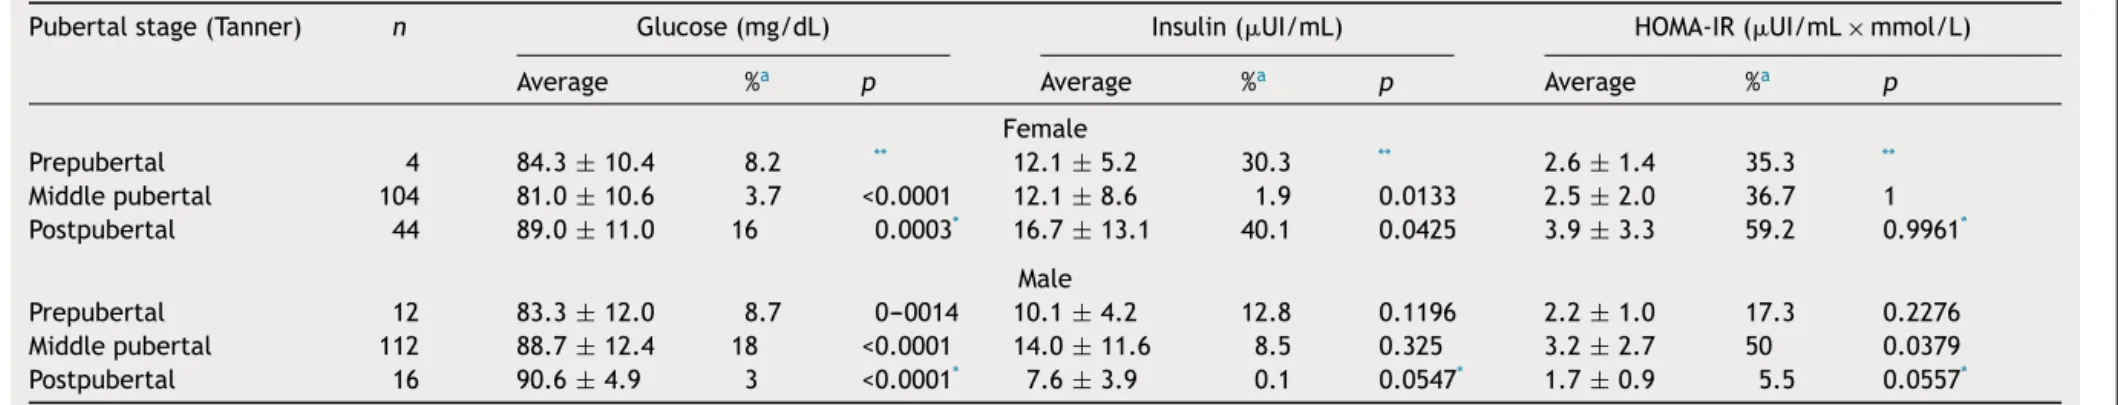 Table 4 Glucose, insulin and HOMA-IR by pubertal stage (Tanner) and gender. Saltillo, Coahuila, Mexico (2012---2013).